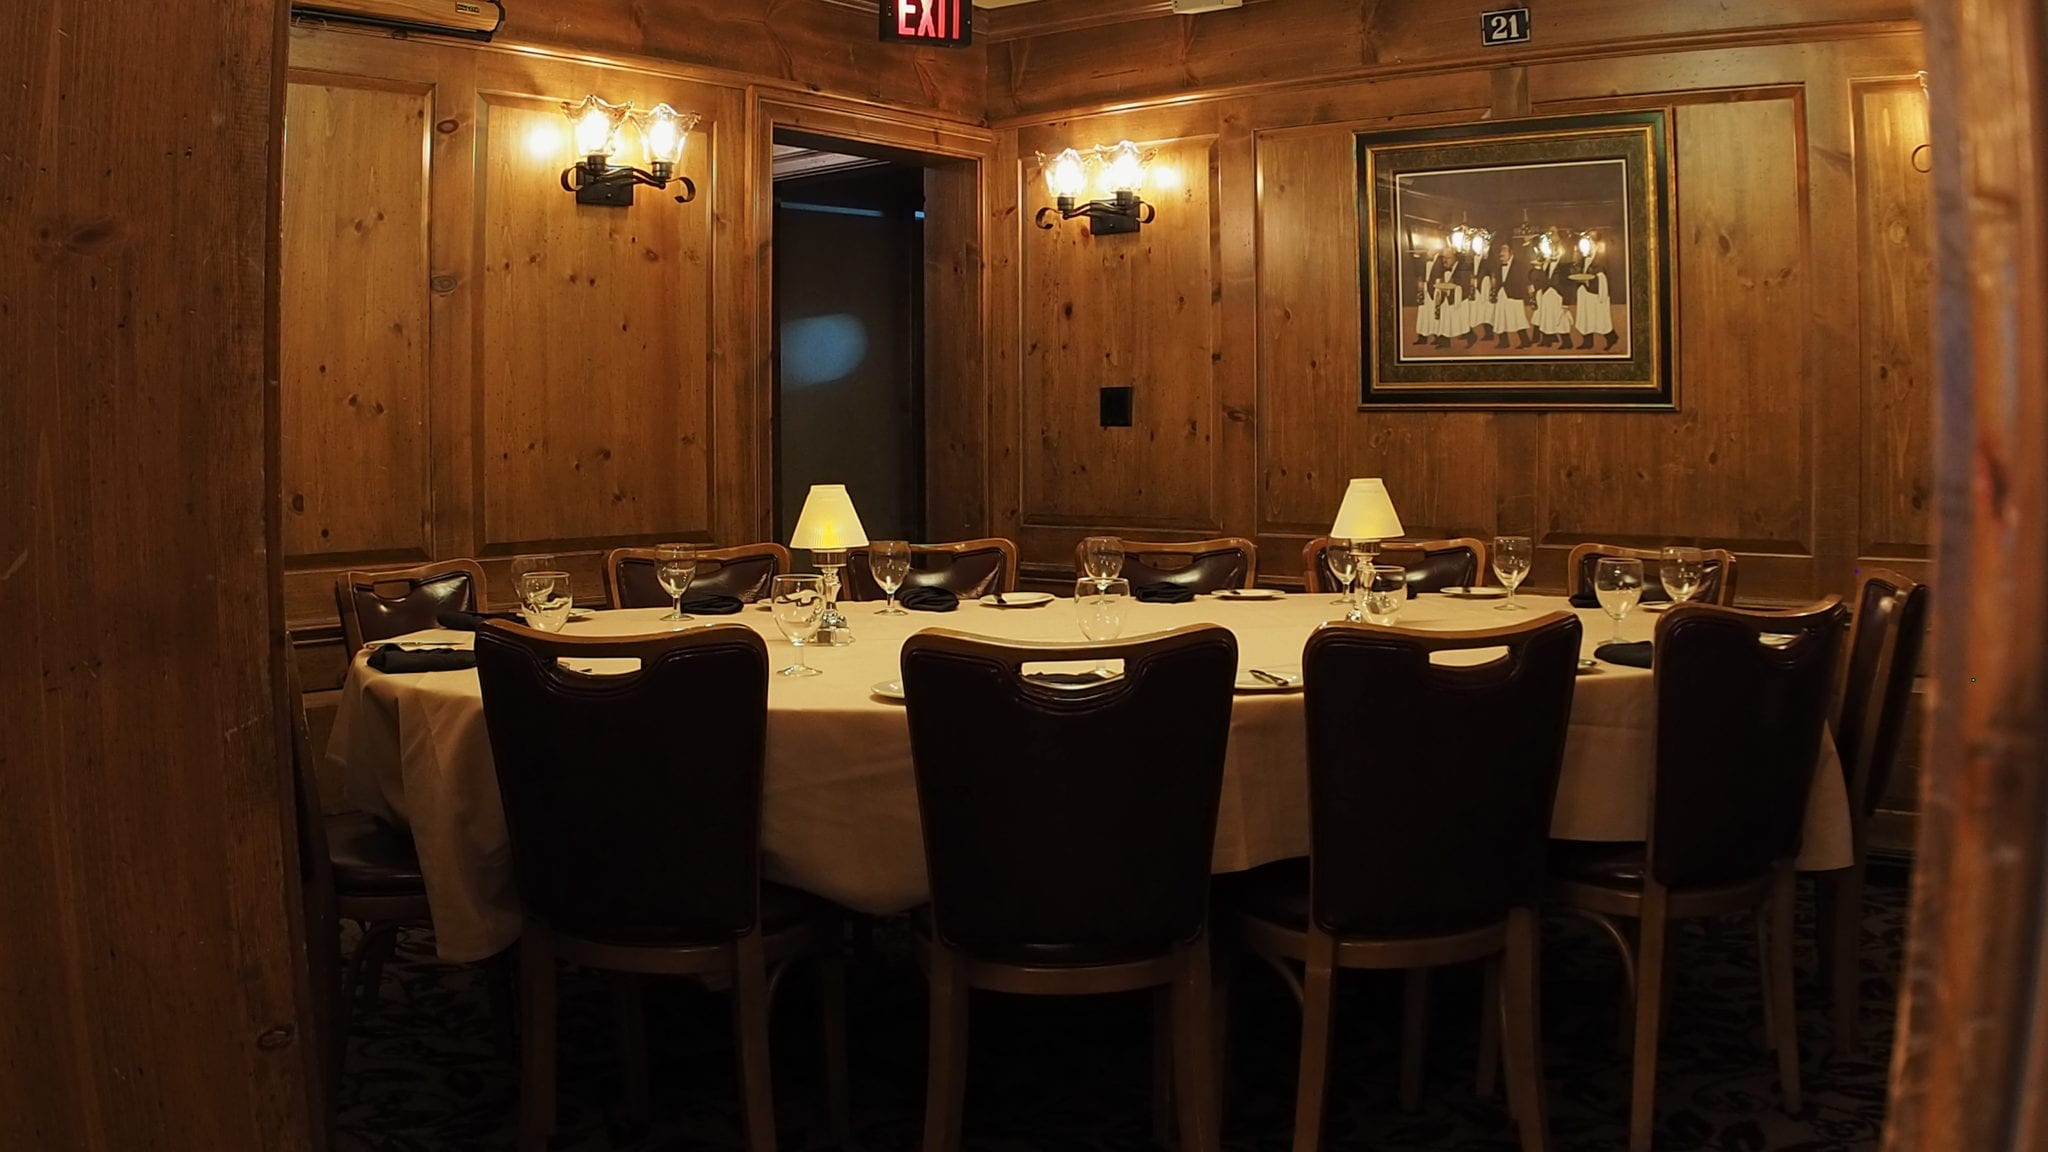 Table 21, perfect for business meetings or private gatherings at Eddie Martini's